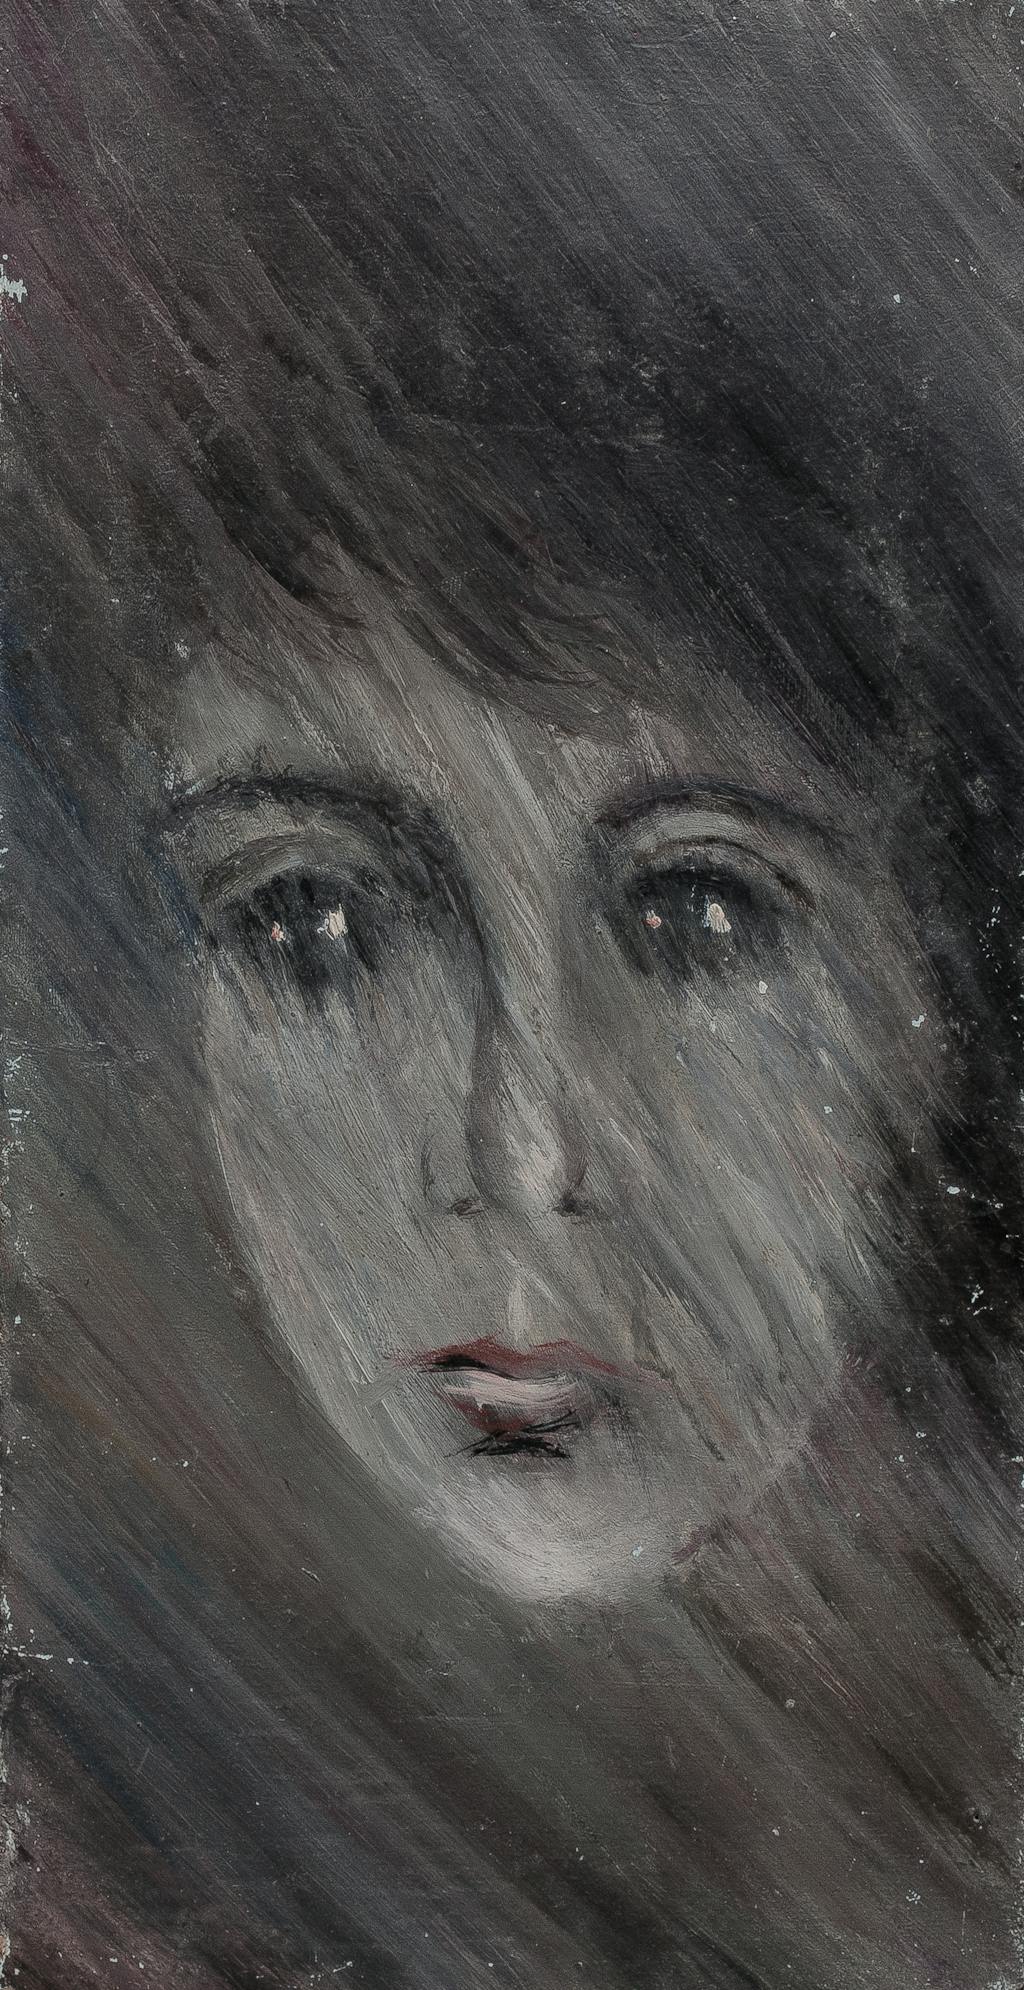 Painting "Rain", painted by Elena Birkenwald in 1986